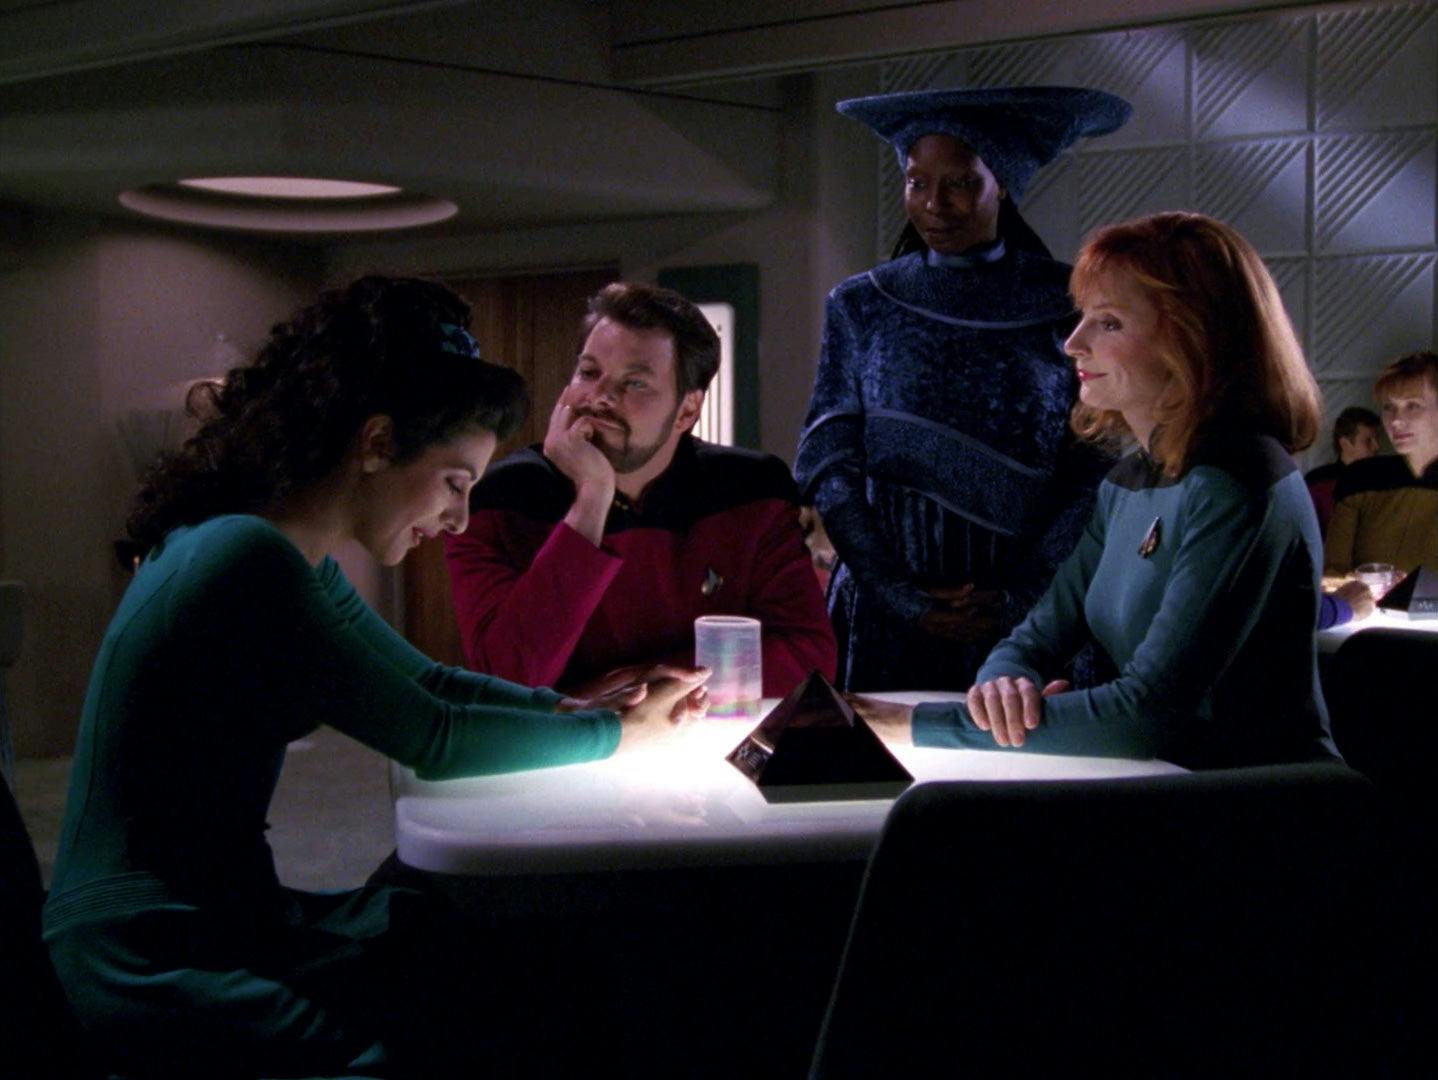 Deanna Troi sits at 10 Forward surrounding by the love and support of friends Riker, Guinan, and Dr. Beverly Crusher